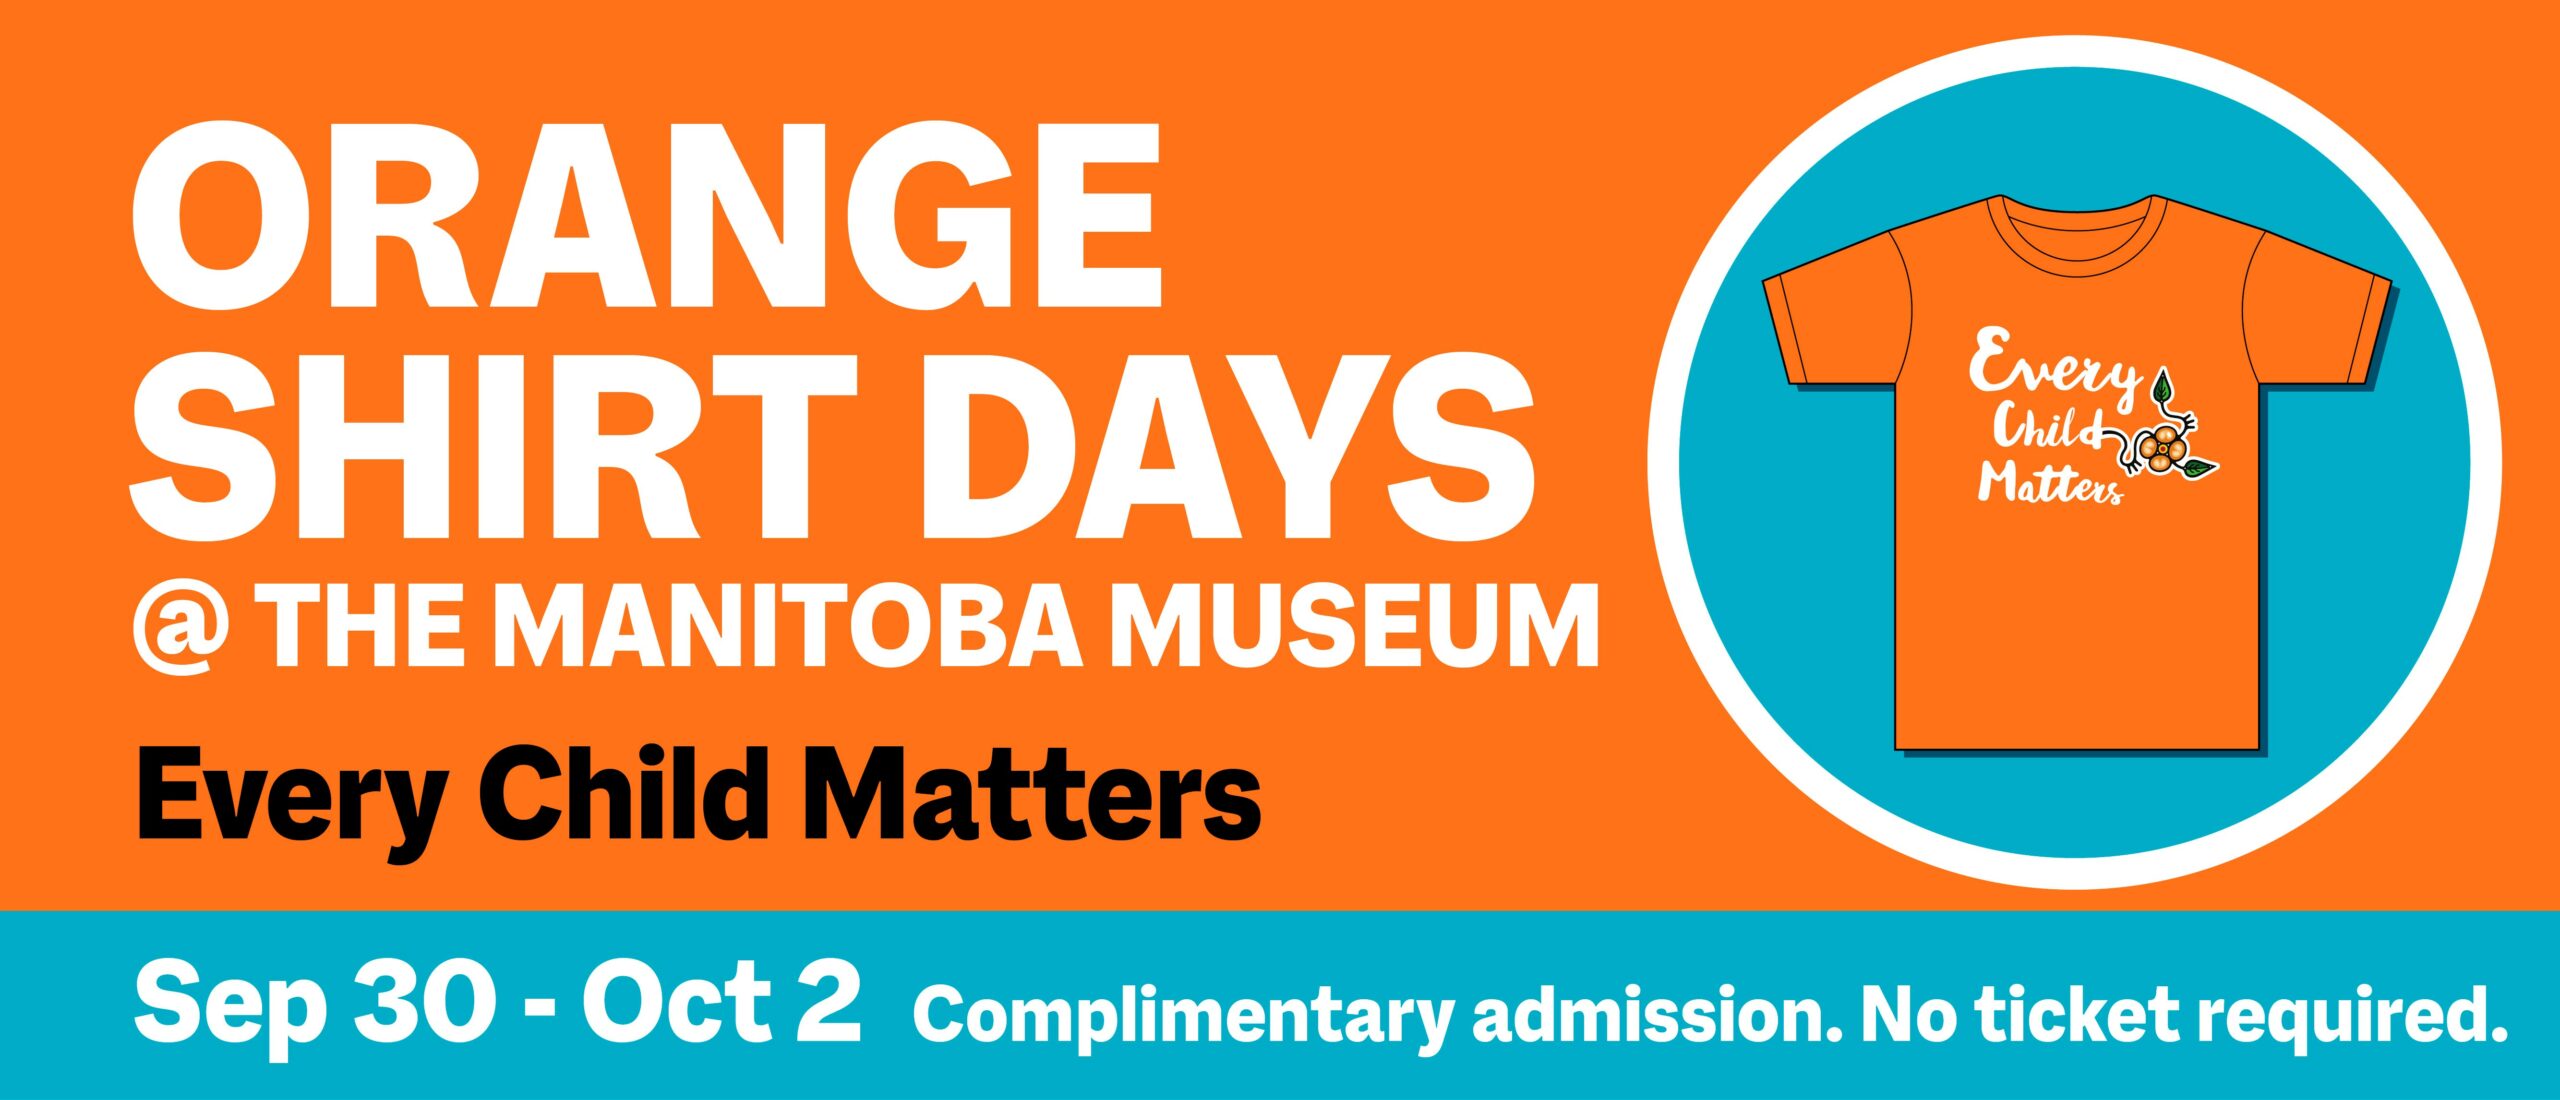 A word graphic. On a teal circle to the right is an orange t-shirt with the words “Every Child Matters” on the front accompanied by a floral motif. Text to the left of it reads “Orange Shirt Days @ the Manitoba Museum / Every Child Matters / Sep 30 – Oct 2 / Complimentary admission. No ticket required.”